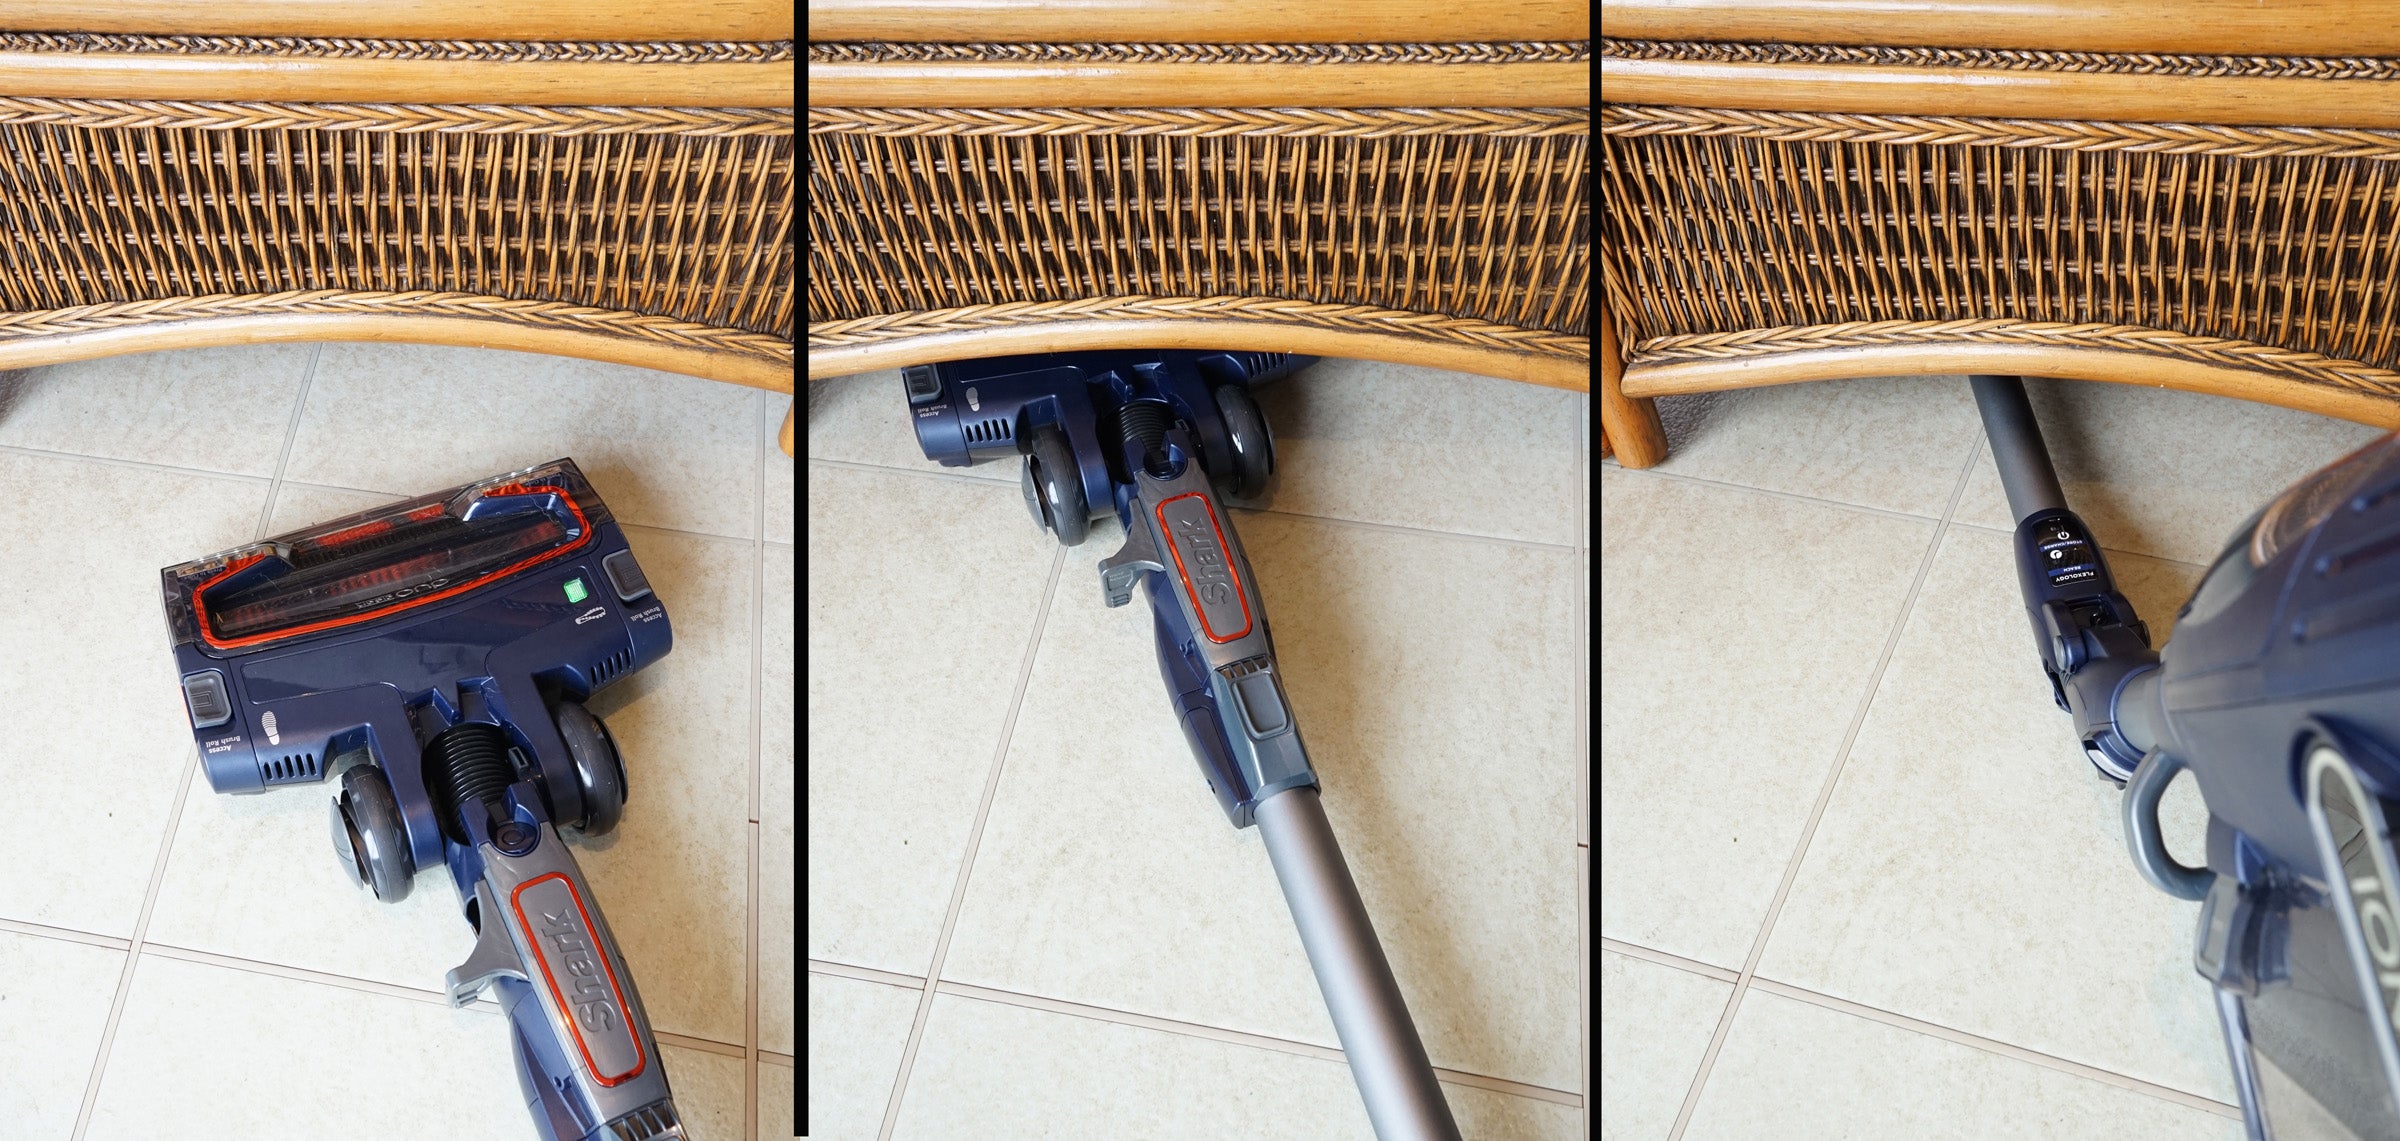 Shark DuoClean Cordless Vacuum cleaning under furniture.